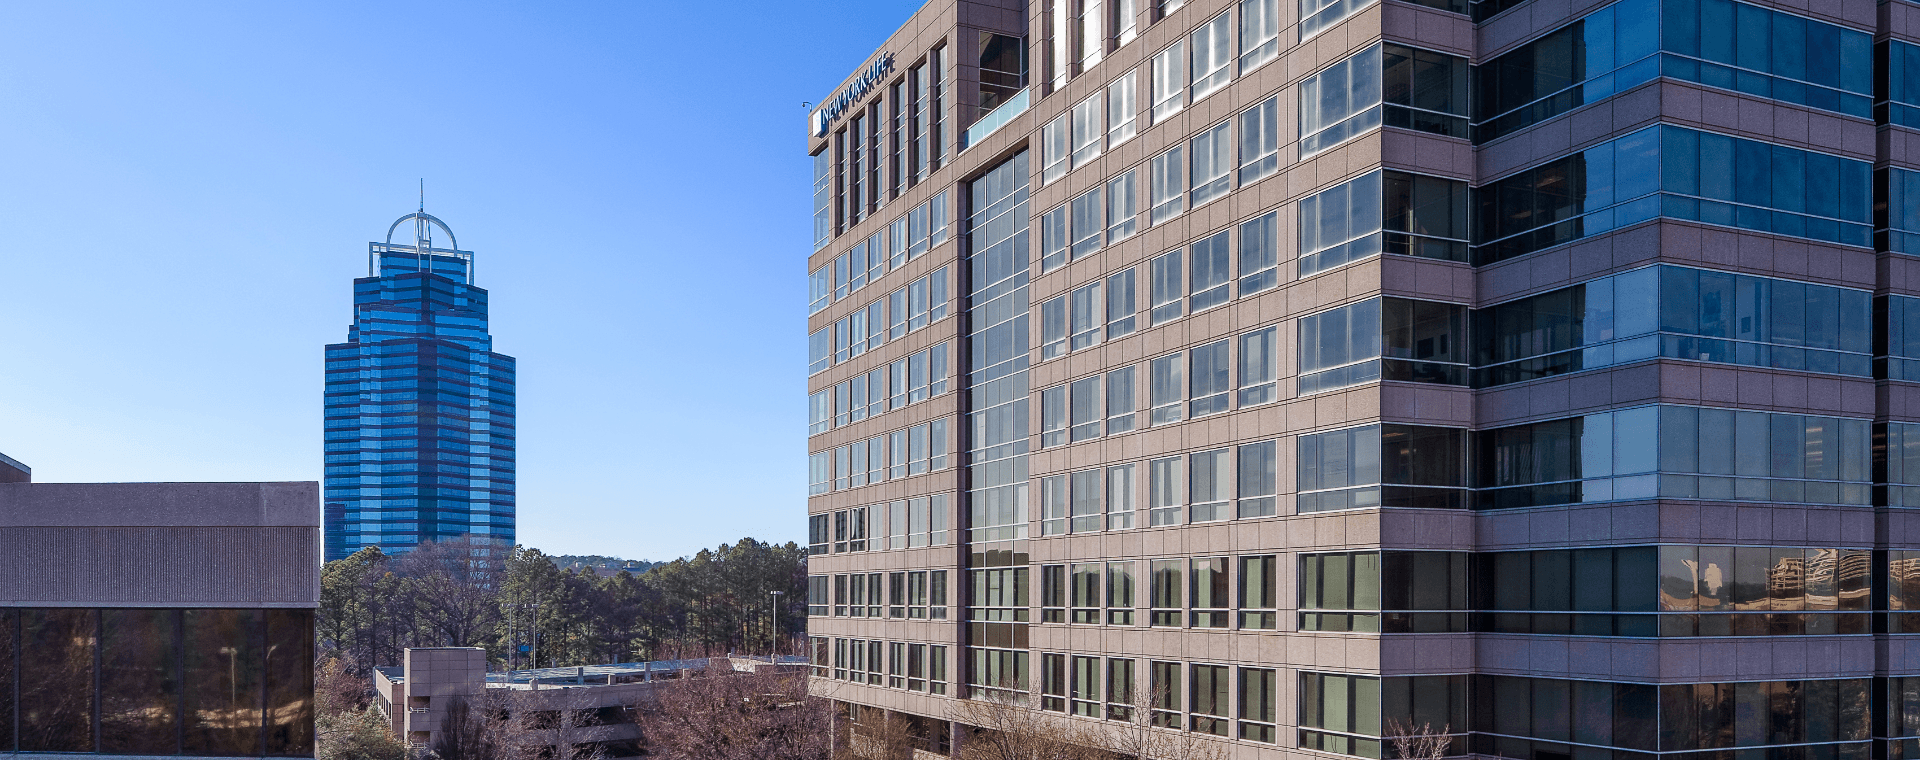 Concourse tower across from Palisades office park